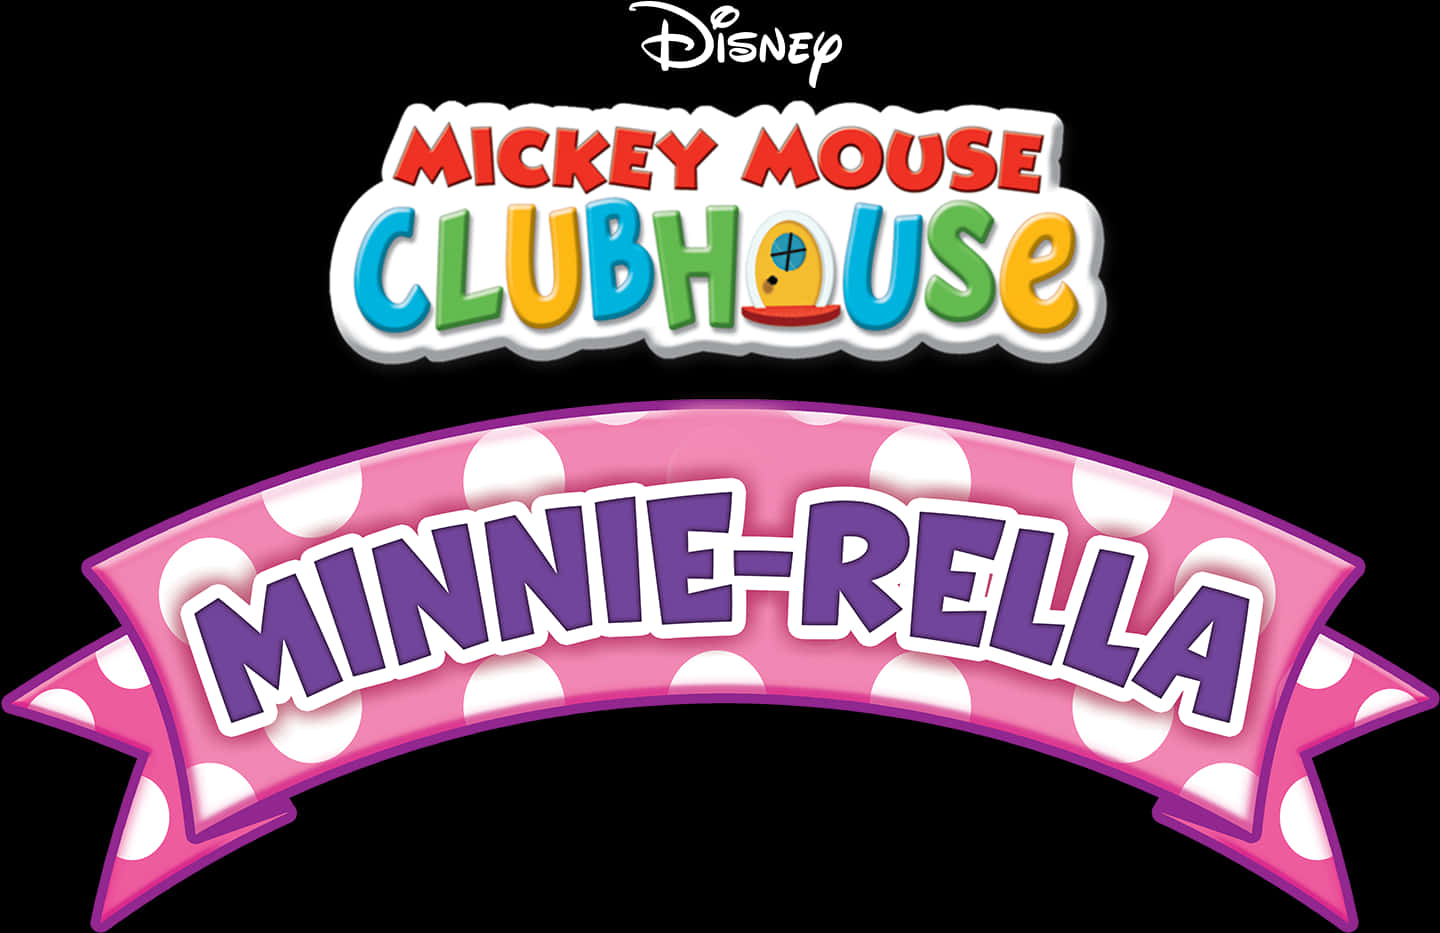 Mickey Mouse Clubhouse Minnie Rella Logo PNG